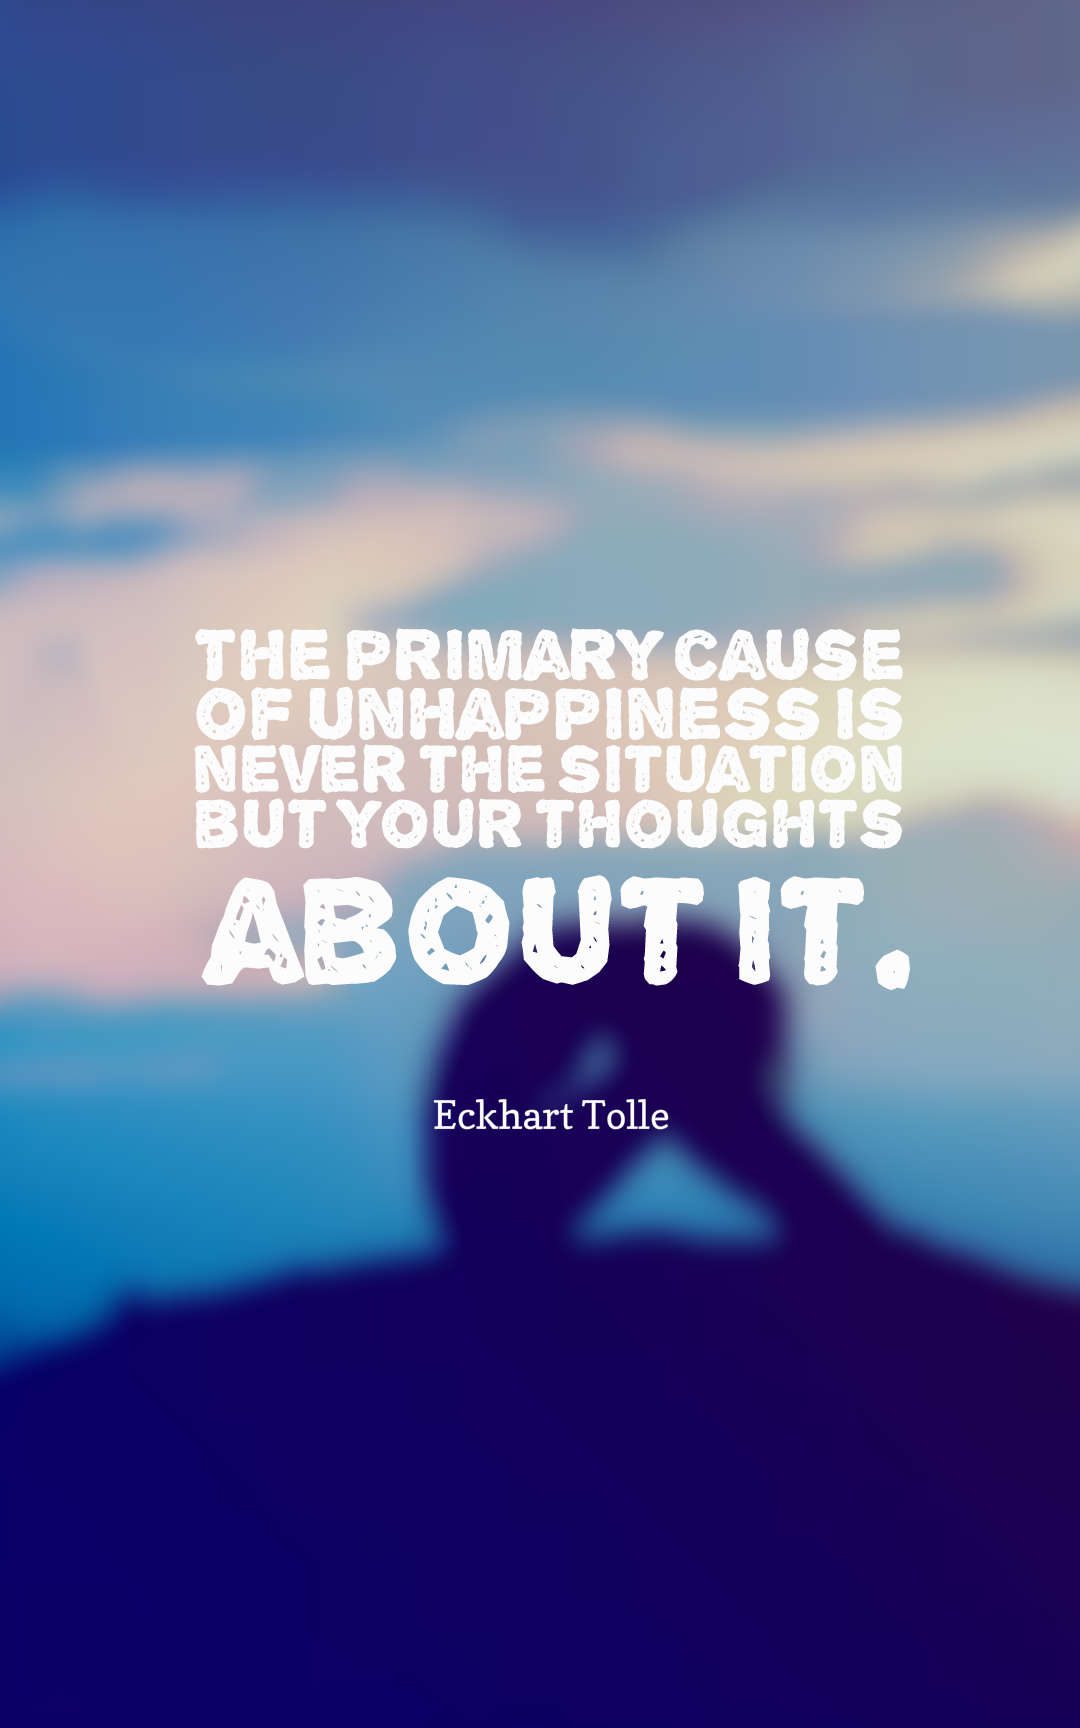 The primary cause of unhappiness is never the situation but your thoughts about it.